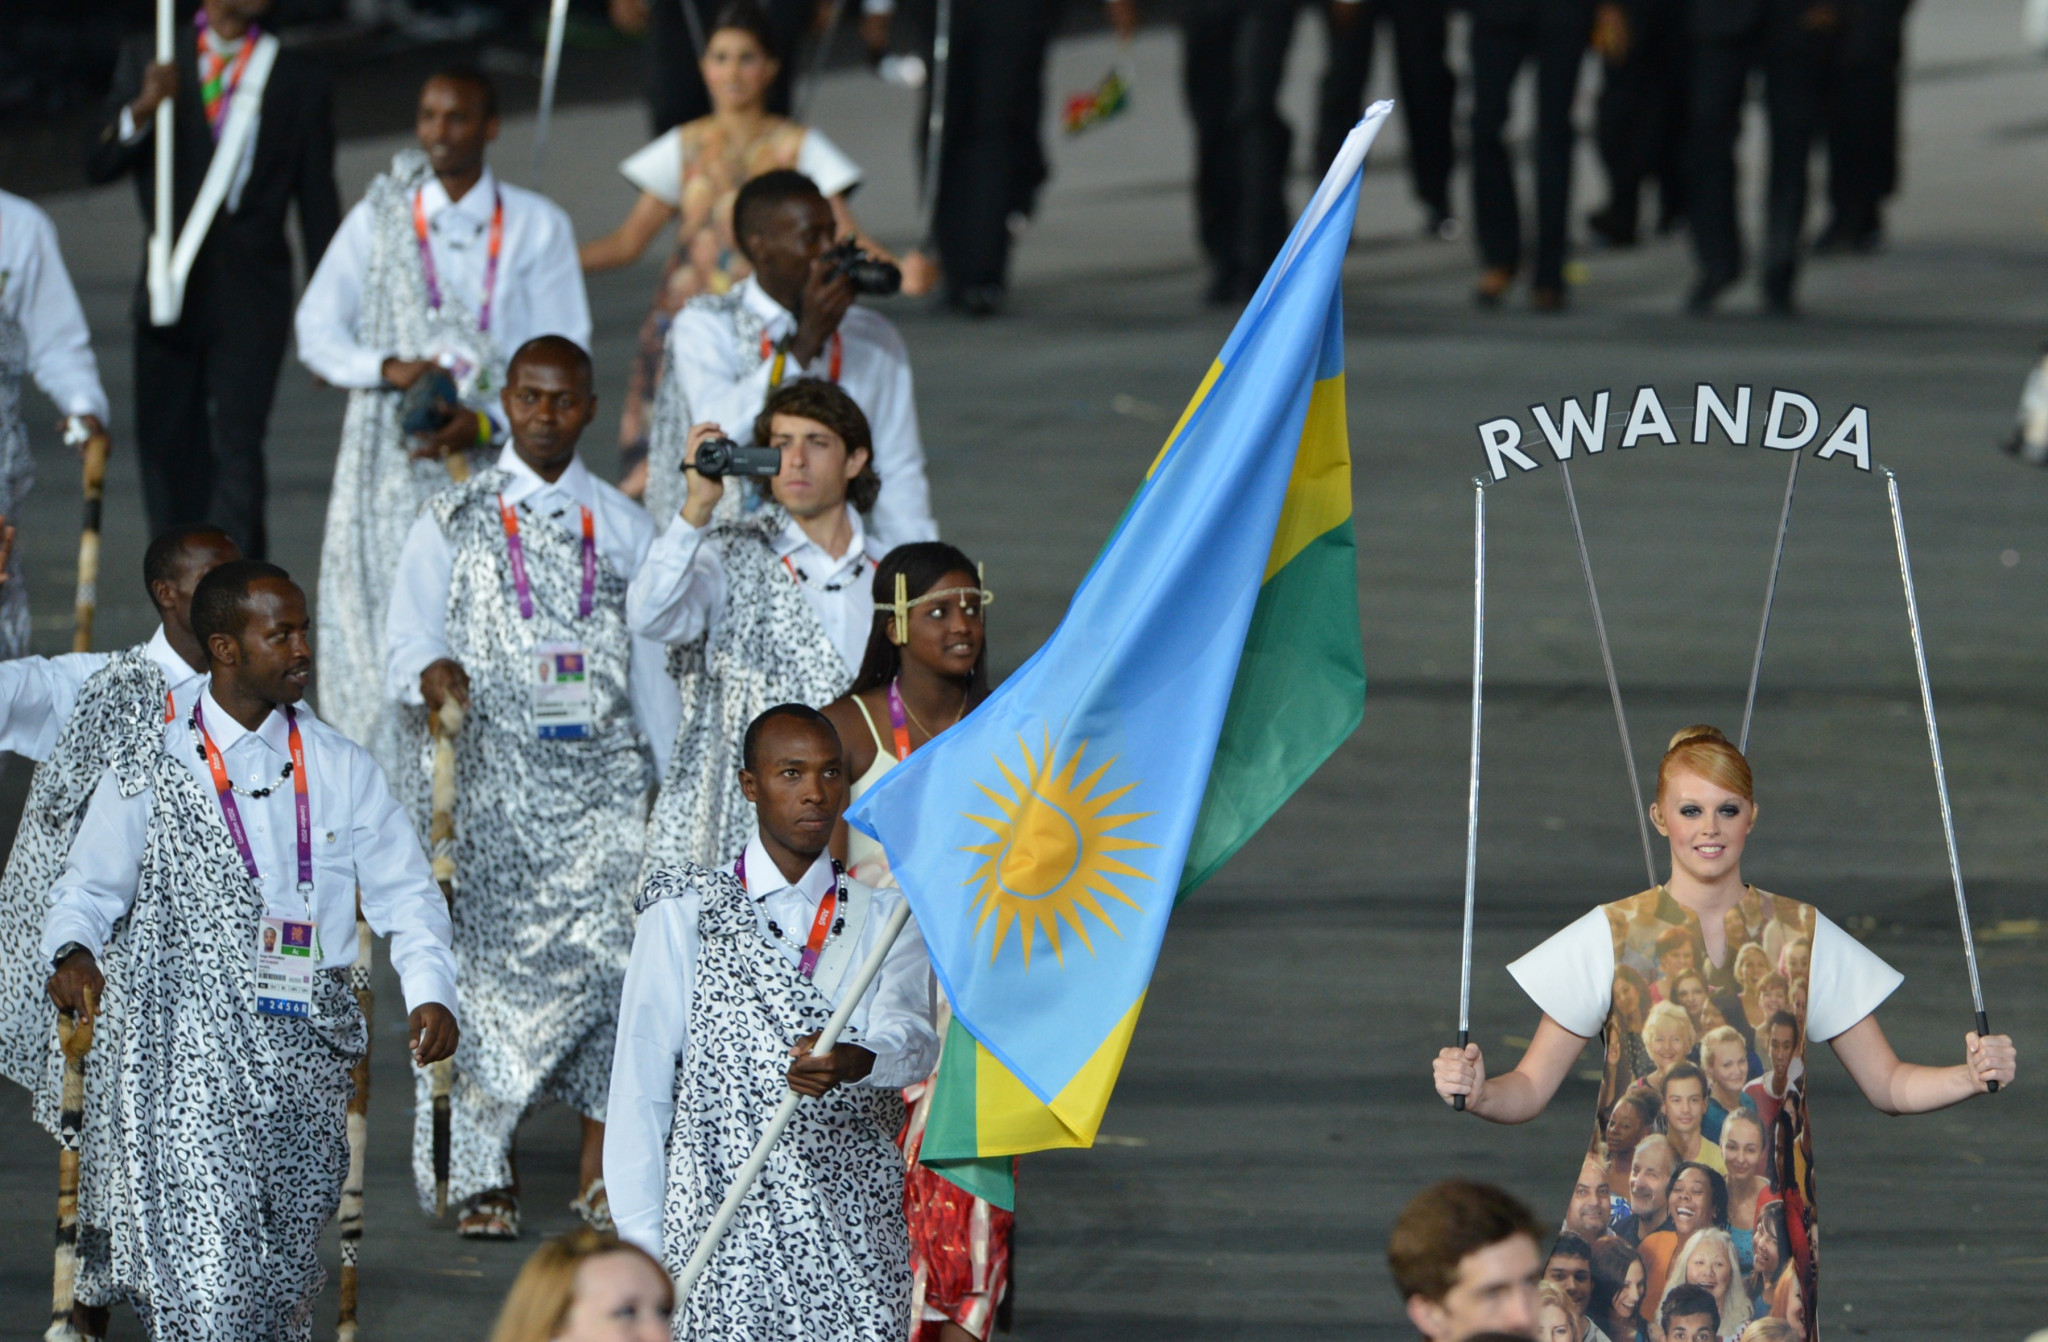 Rwanda have competed in every Summer Olympic Games since Los Angeles 1984 but are still searching for their first medal ©Getty Images